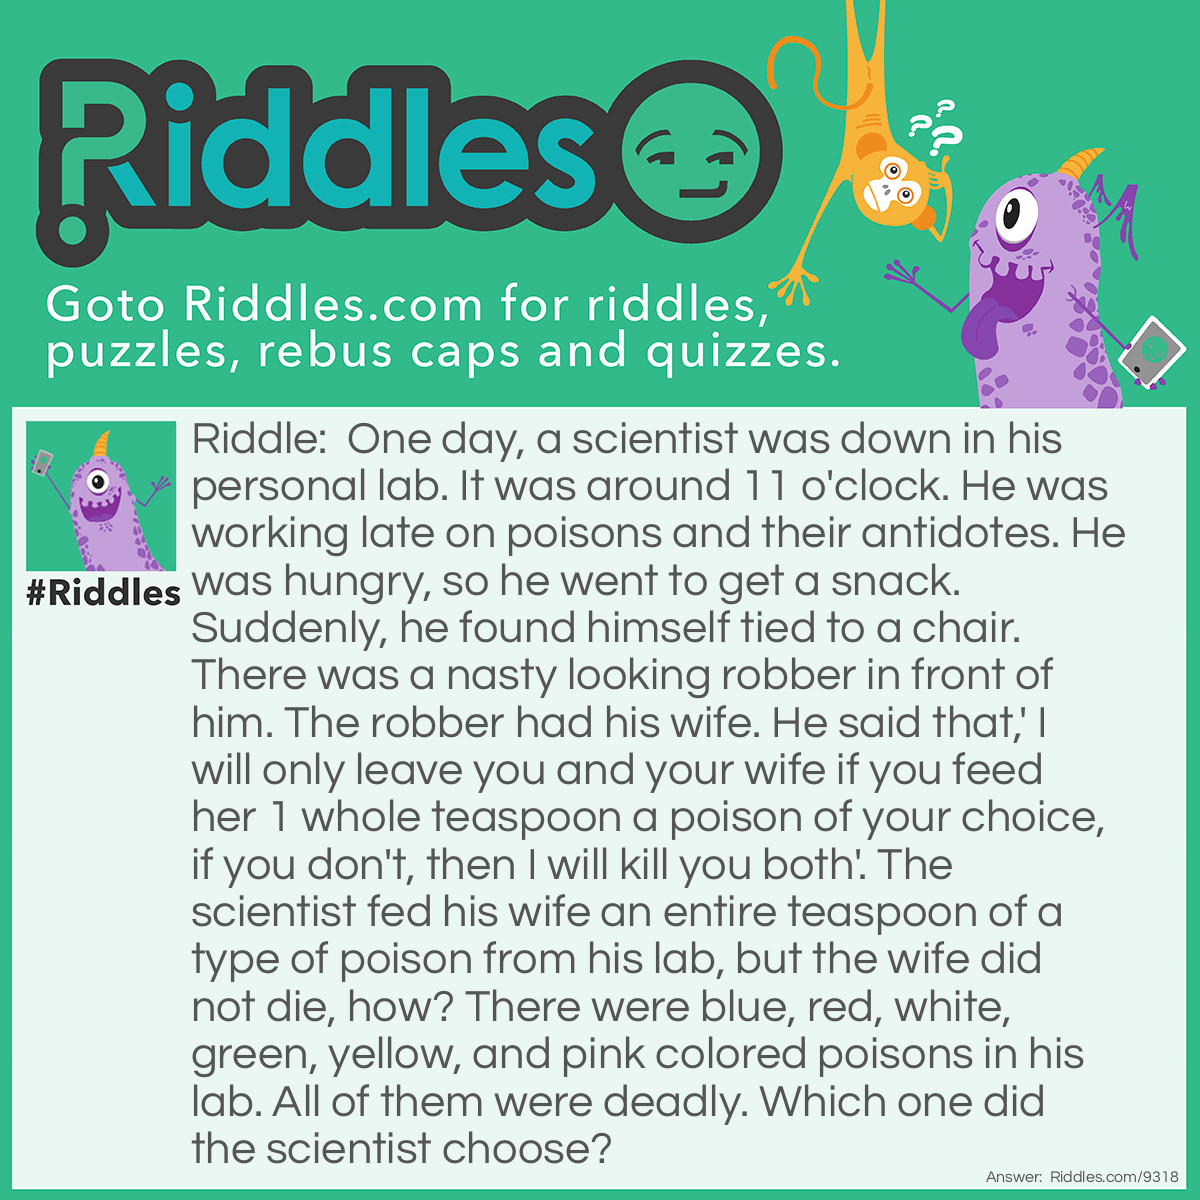 Riddle: One day, a scientist was down in his personal lab. It was around 11 o'clock. He was working late on poisons and their antidotes. He was hungry, so he went to get a snack. Suddenly, he found himself tied to a chair. There was a nasty looking robber in front of him. The robber had his wife. He said that,' I will only leave you and your wife if you feed her 1 whole teaspoon a poison of your choice, if you don't, then I will kill you both'. The scientist fed his wife an entire teaspoon of a type of poison from his lab, but the wife did not die, how? There were blue, red, white, green, yellow, and pink colored poisons in his lab. All of them were deadly. Which one did the scientist choose? Answer: The white one, since sugar is known as 'White Poison'.